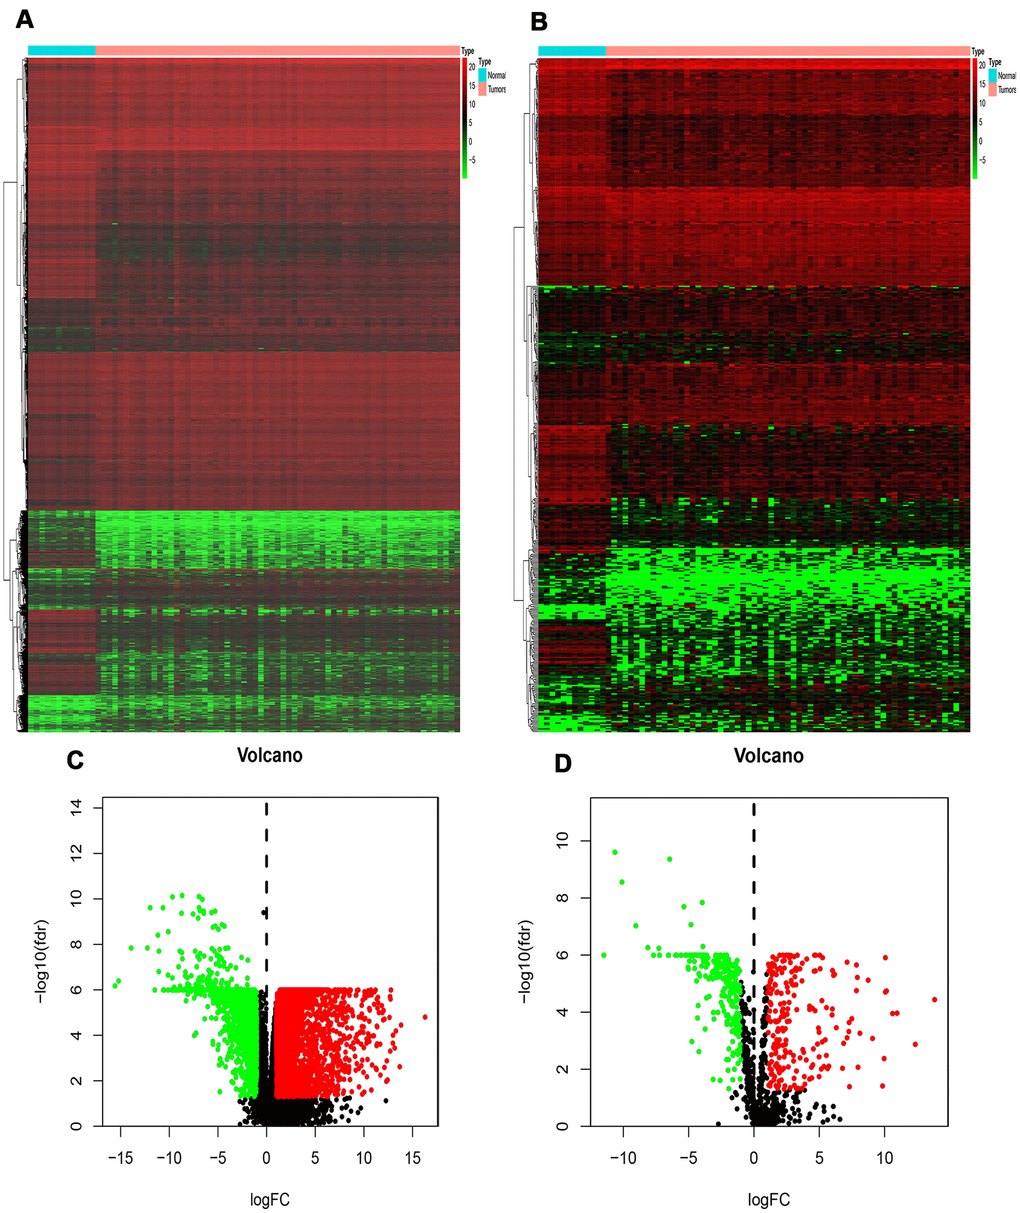 Differentially expressed genes and IRGs in RTK. (A) Heat-map of significant DEGs in RTK. The color from green to red represents the progression from low expression to high expression. (B) Heatmap of significant differentially expressed immune-related genes in RTK. Red represents higher expression while green represents lower expression. (C) Volcano plot of differentially expressed genes. The red dots in the plot represents up-regulated genes and green dots represents down-regulated genes with statistical significance. Black dots represent no DEGs. (D) Volcano plot of differentially expressed immune-related genes in RTK. Colored dots represent differentially expressed immune-related genes and black dots represent no differentially expressed immune-related genes. Abbreviations: GO, Gene Ontology. IRGs, immune-related genes. DEGs, differentially expressed genes.